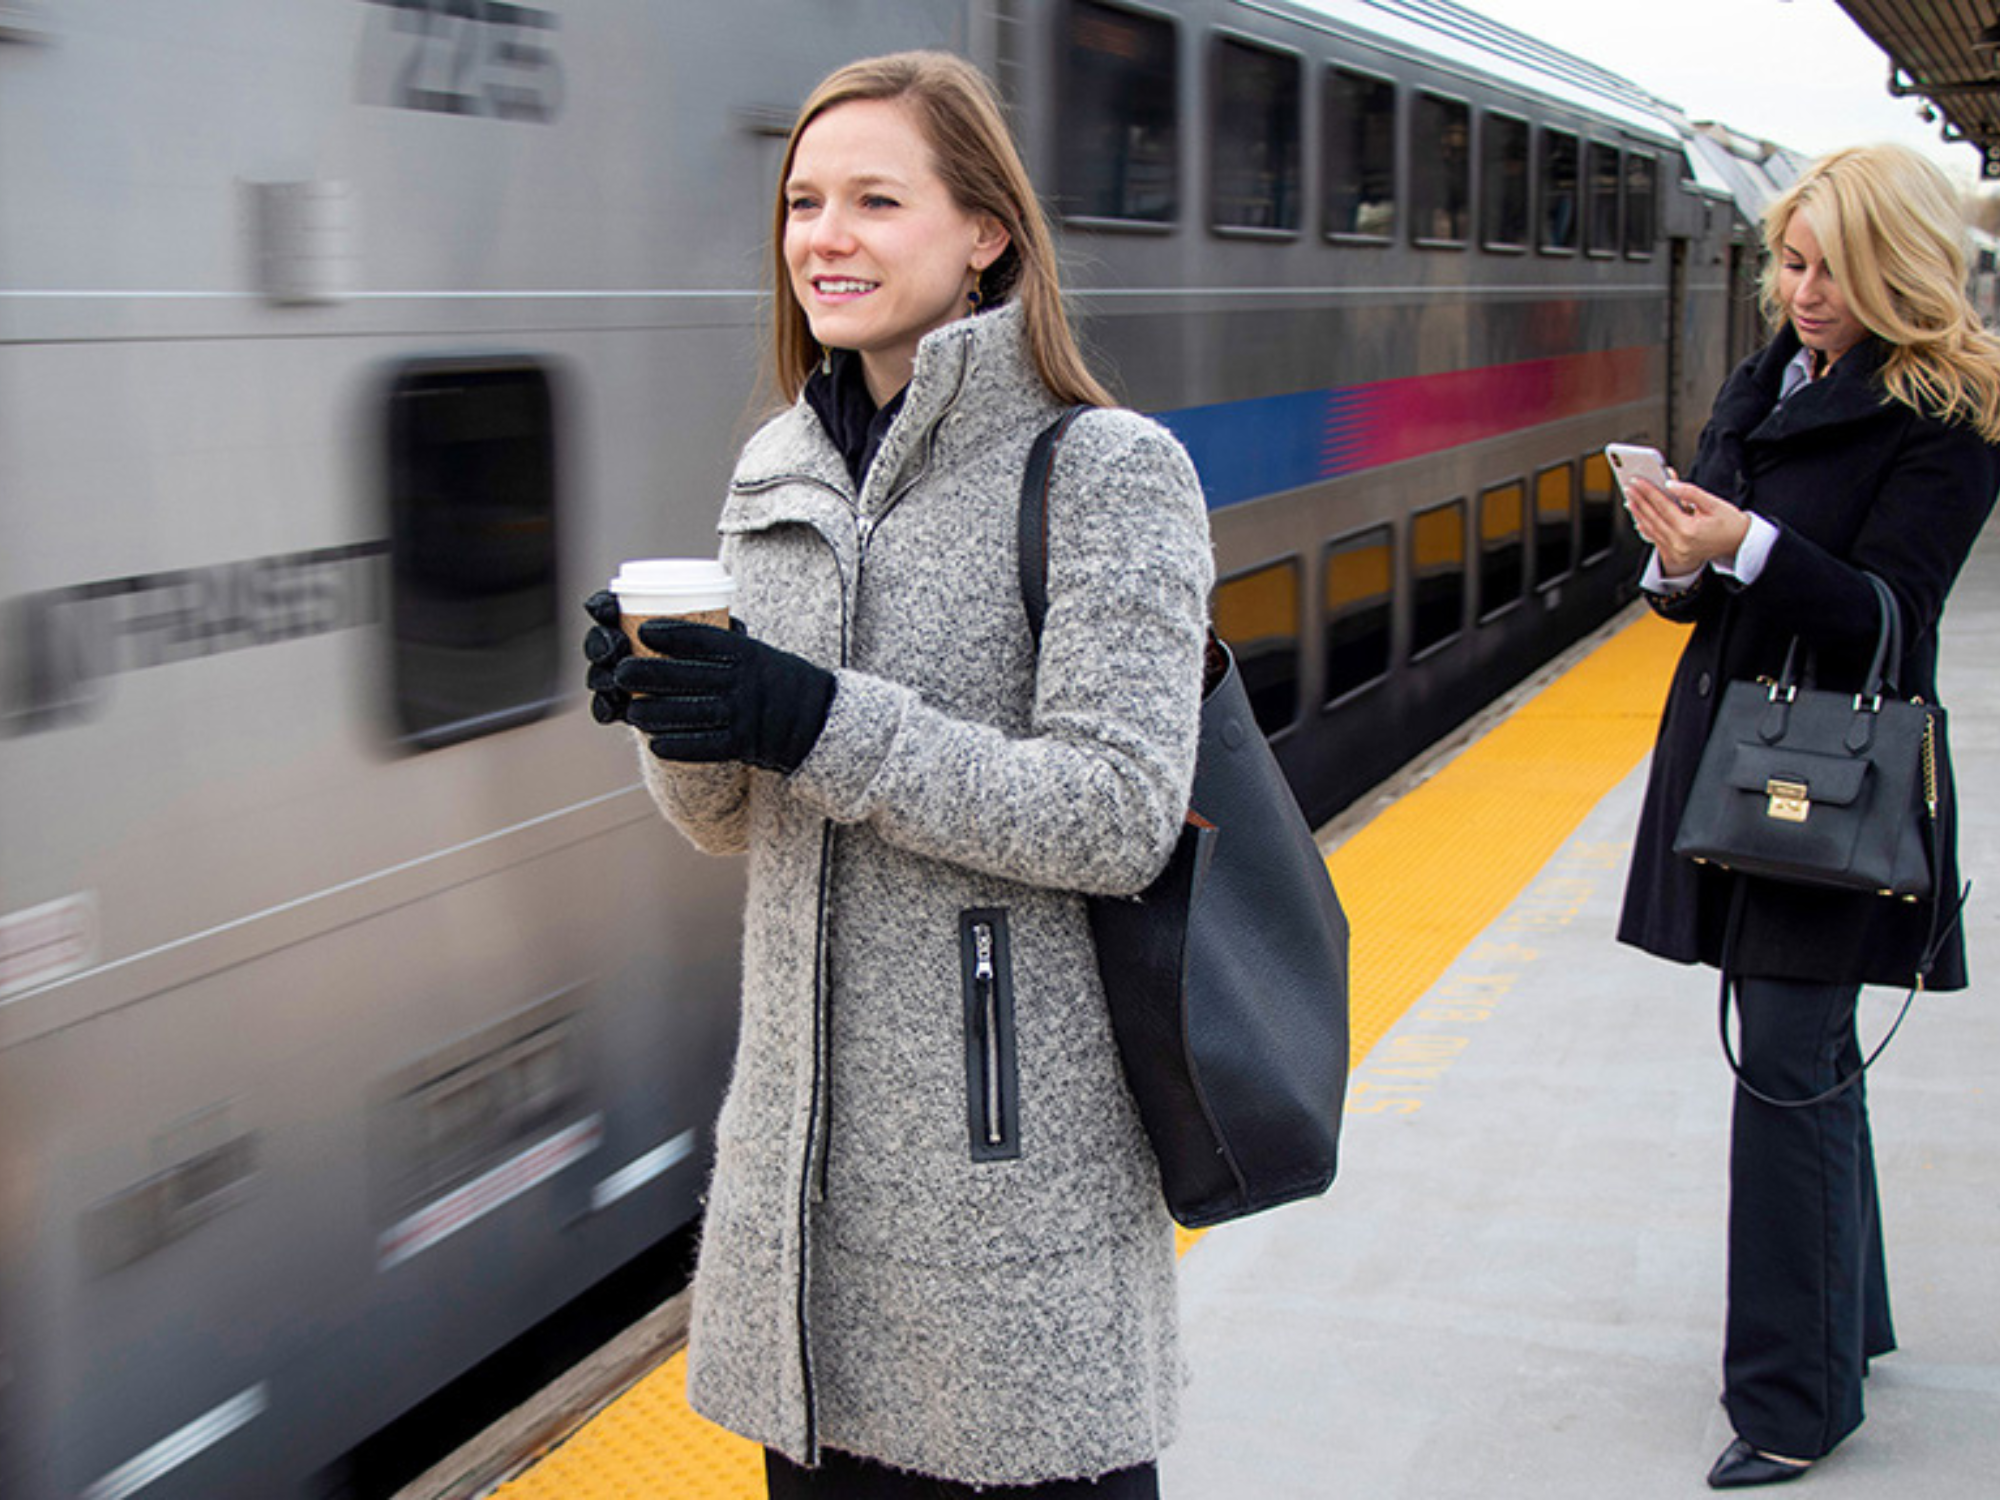 UNION TRAIN STATION IS NOW OFFERING DIRECT SERVICE TO NEW YORK CITY